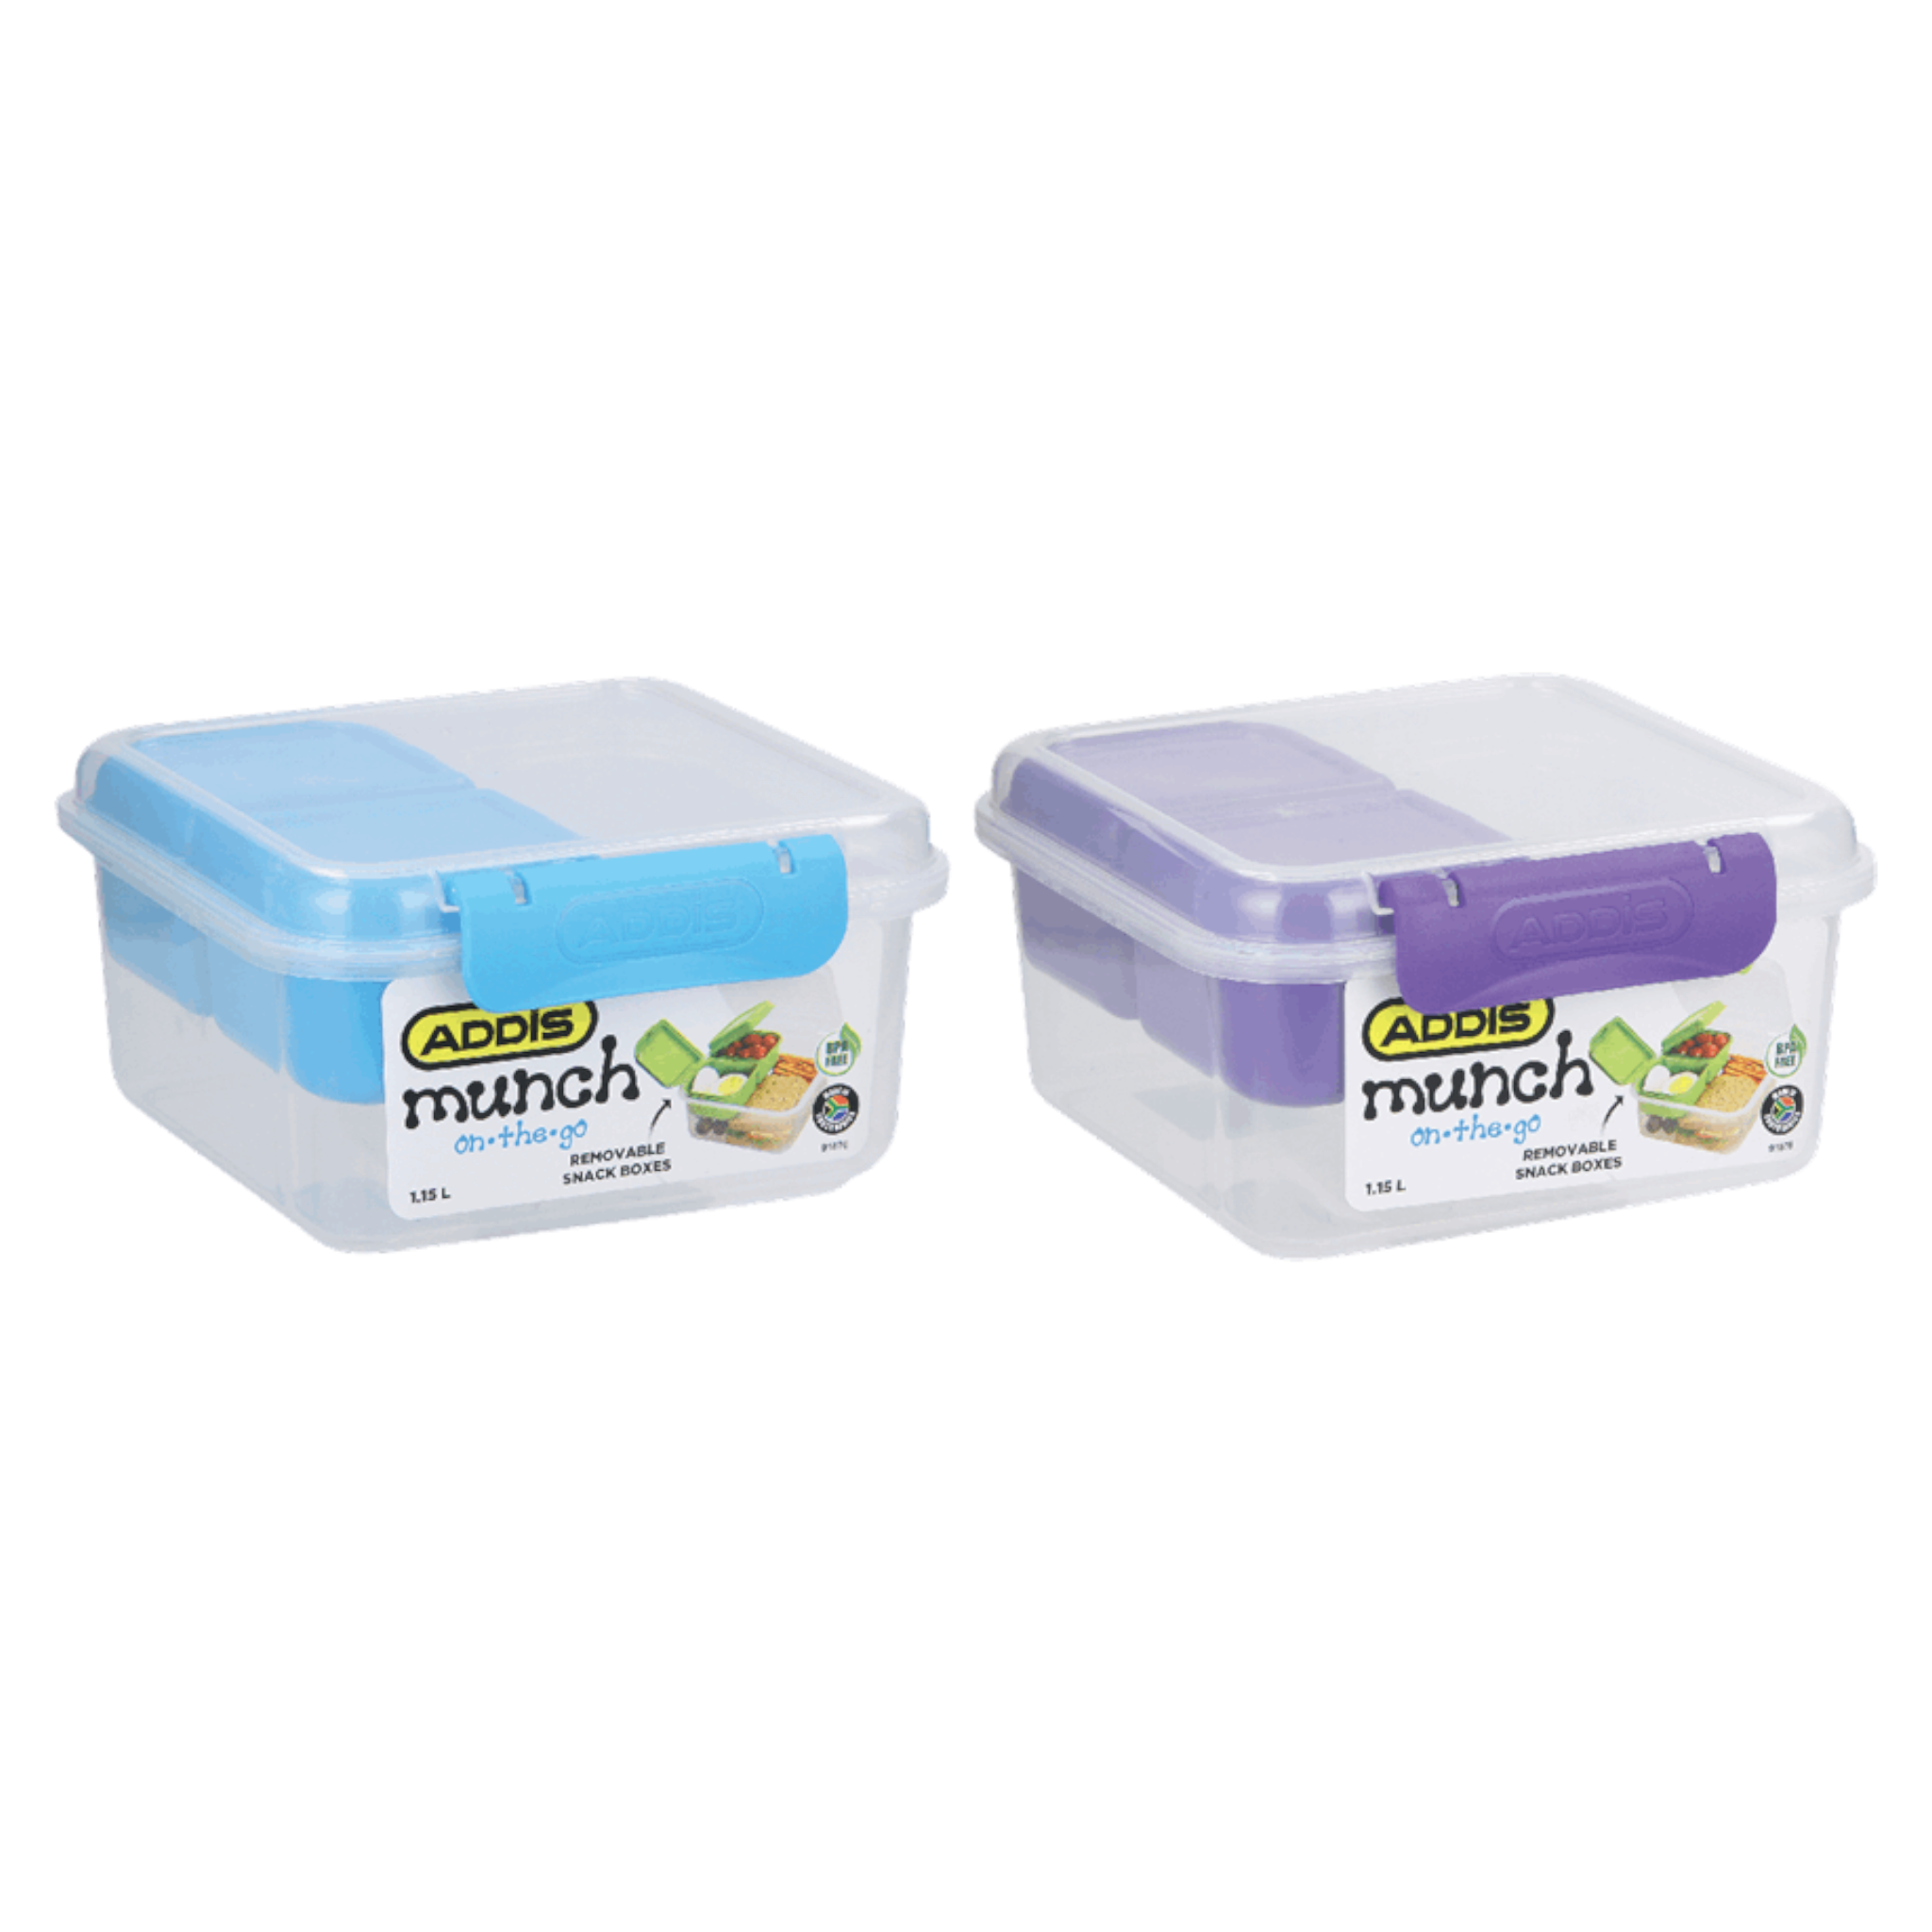 Addis Munch On-the-Go Lunch Box Square 1.15L